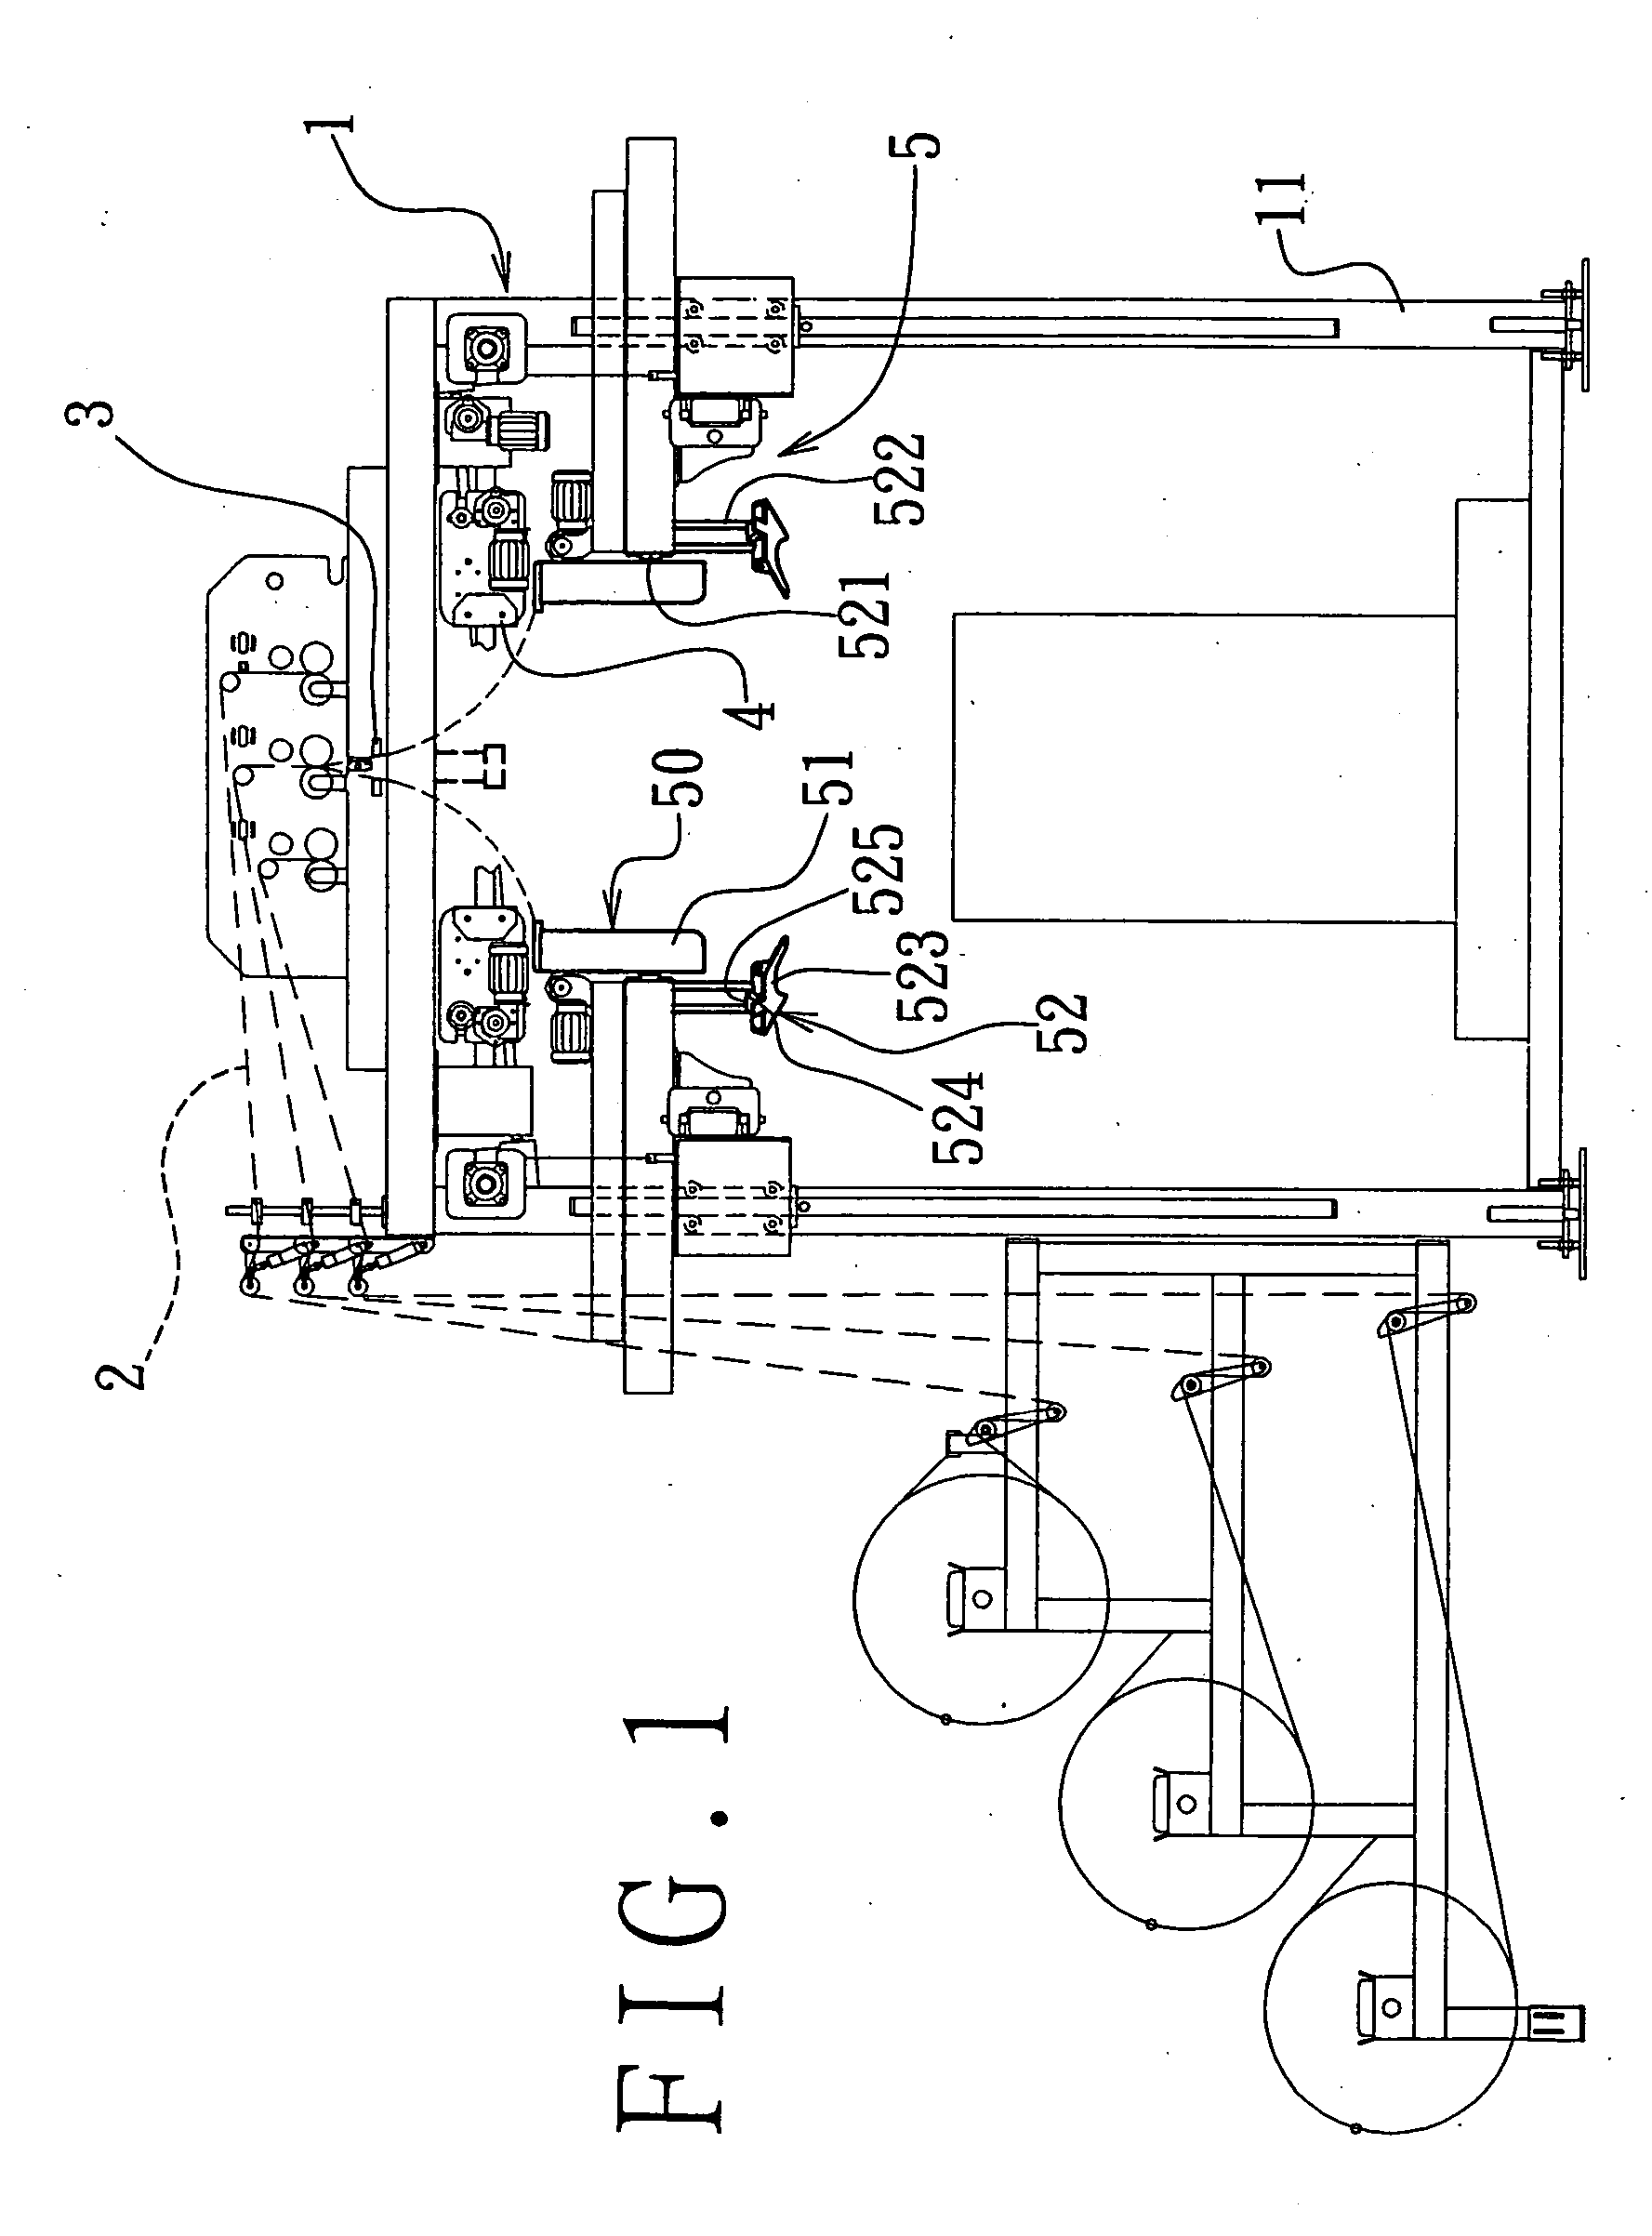 Detecting and protecting device of a shrink film machine